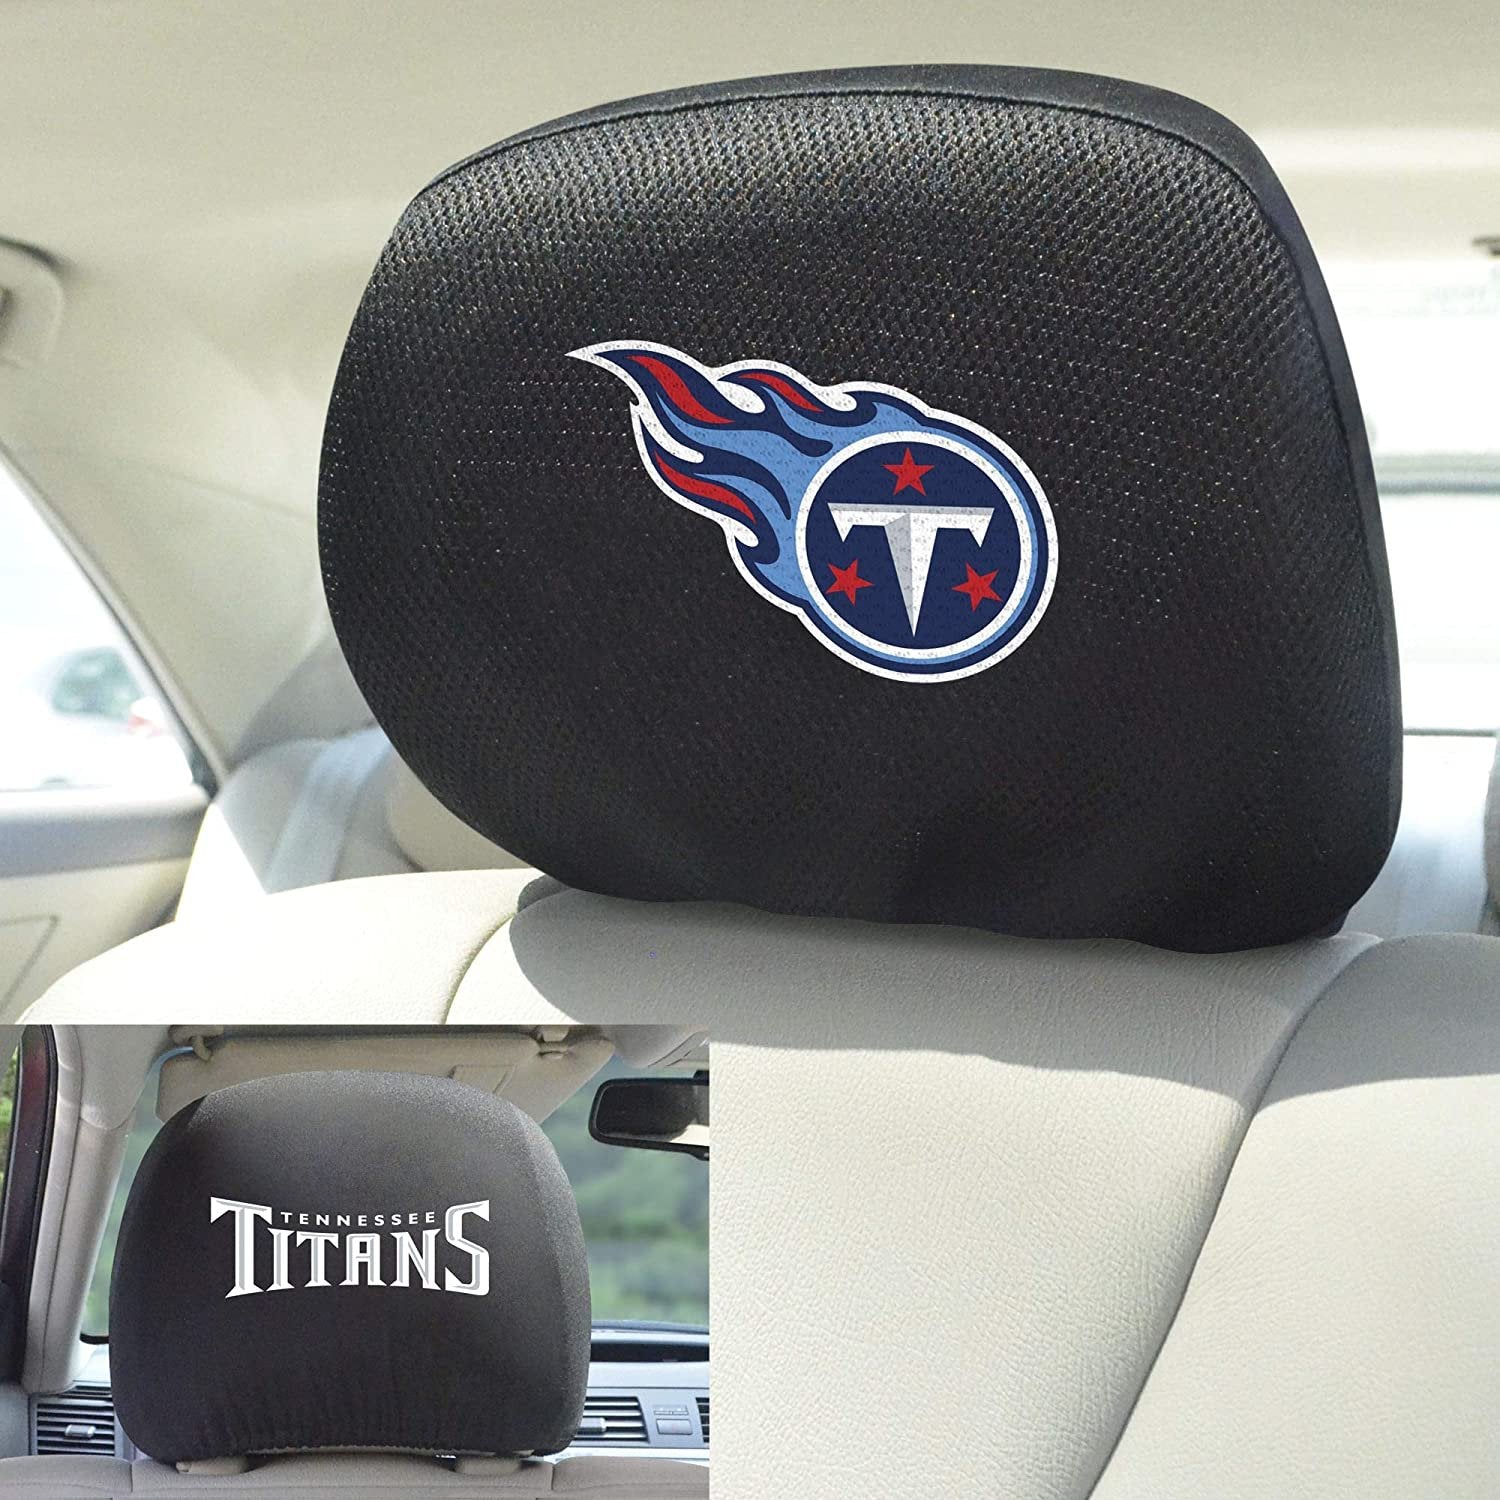 Tennessee Titans Pair of Premium Auto Head Rest Covers, Embroidered, Black Elastic, 14x10 Inch